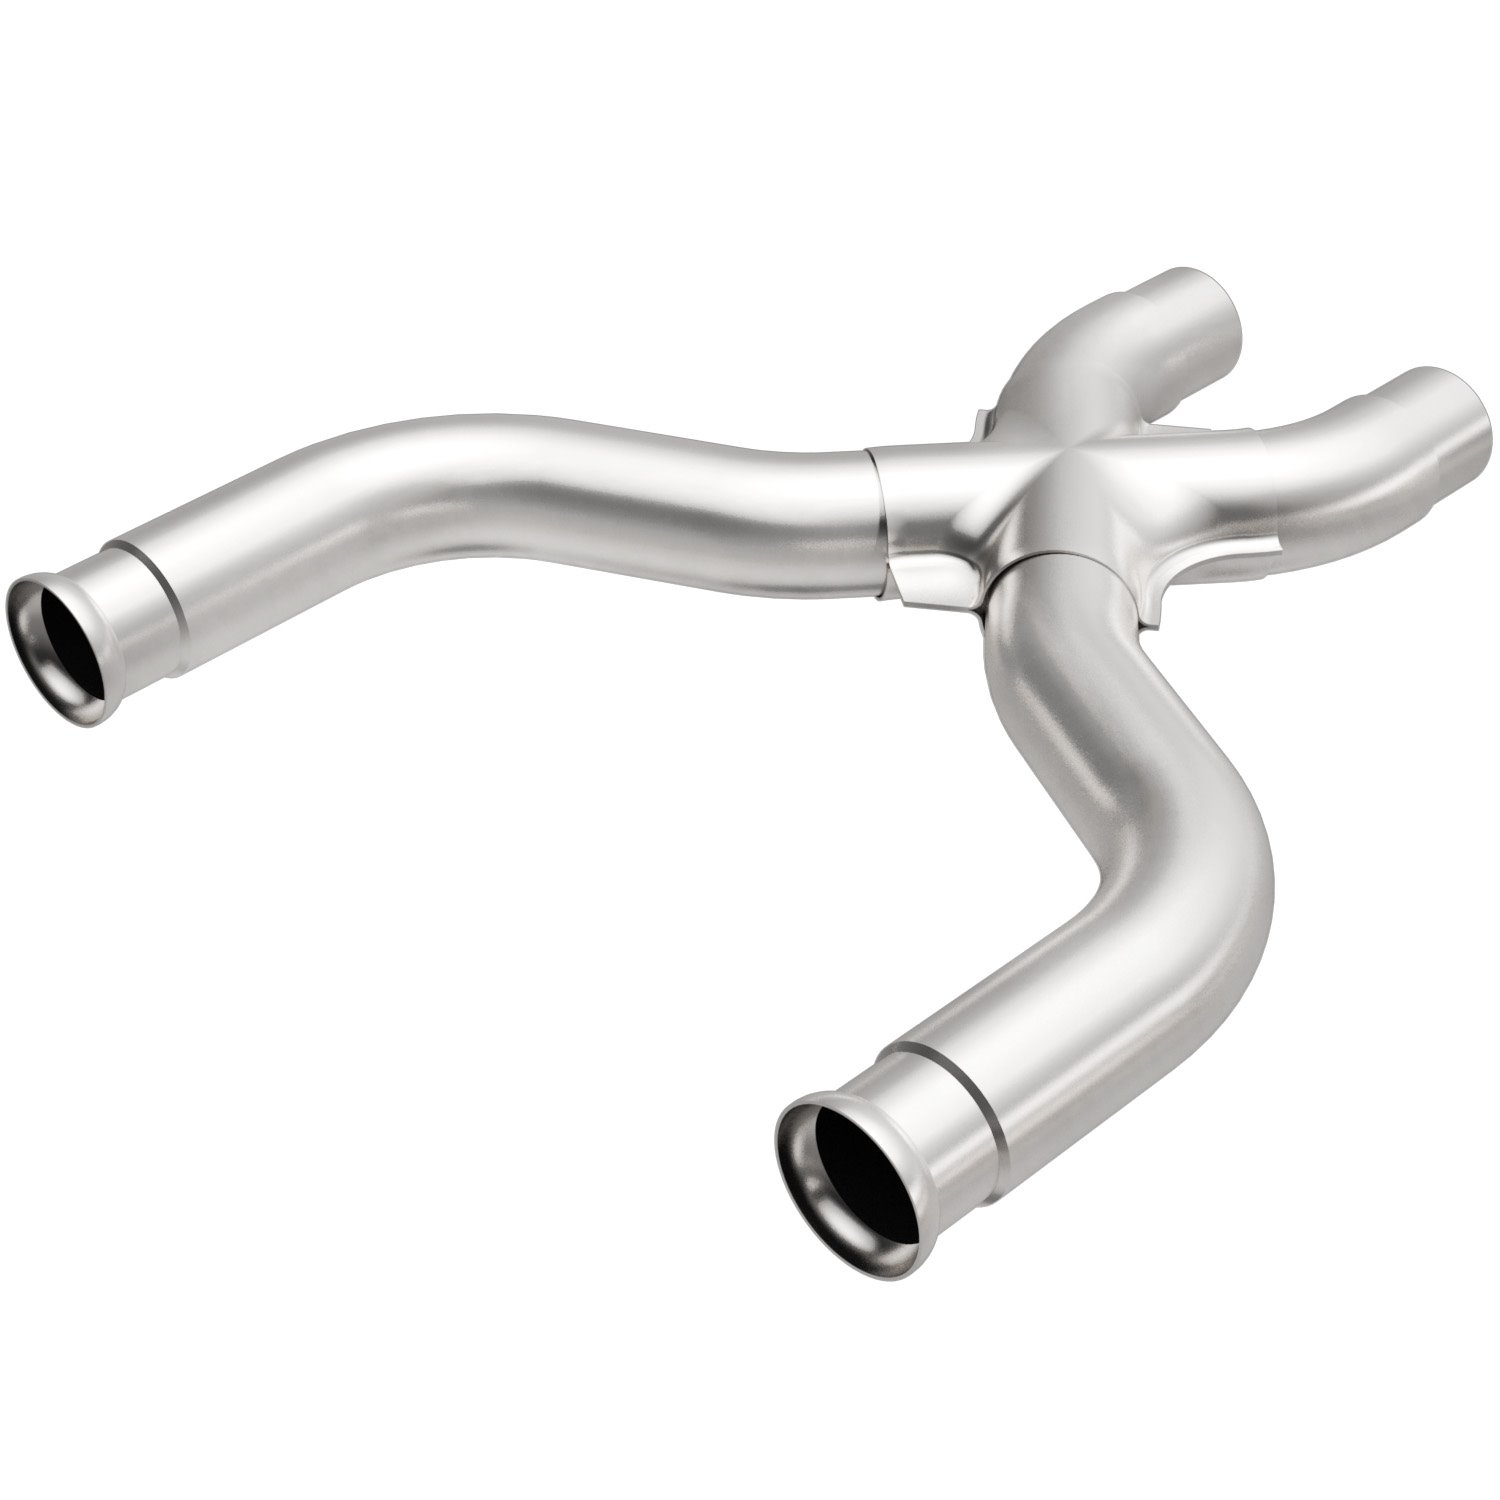 Clamp-On Tru-X Exhaust Pipe 2011-14 Ford Mustang GT & Boss 302 5.0L